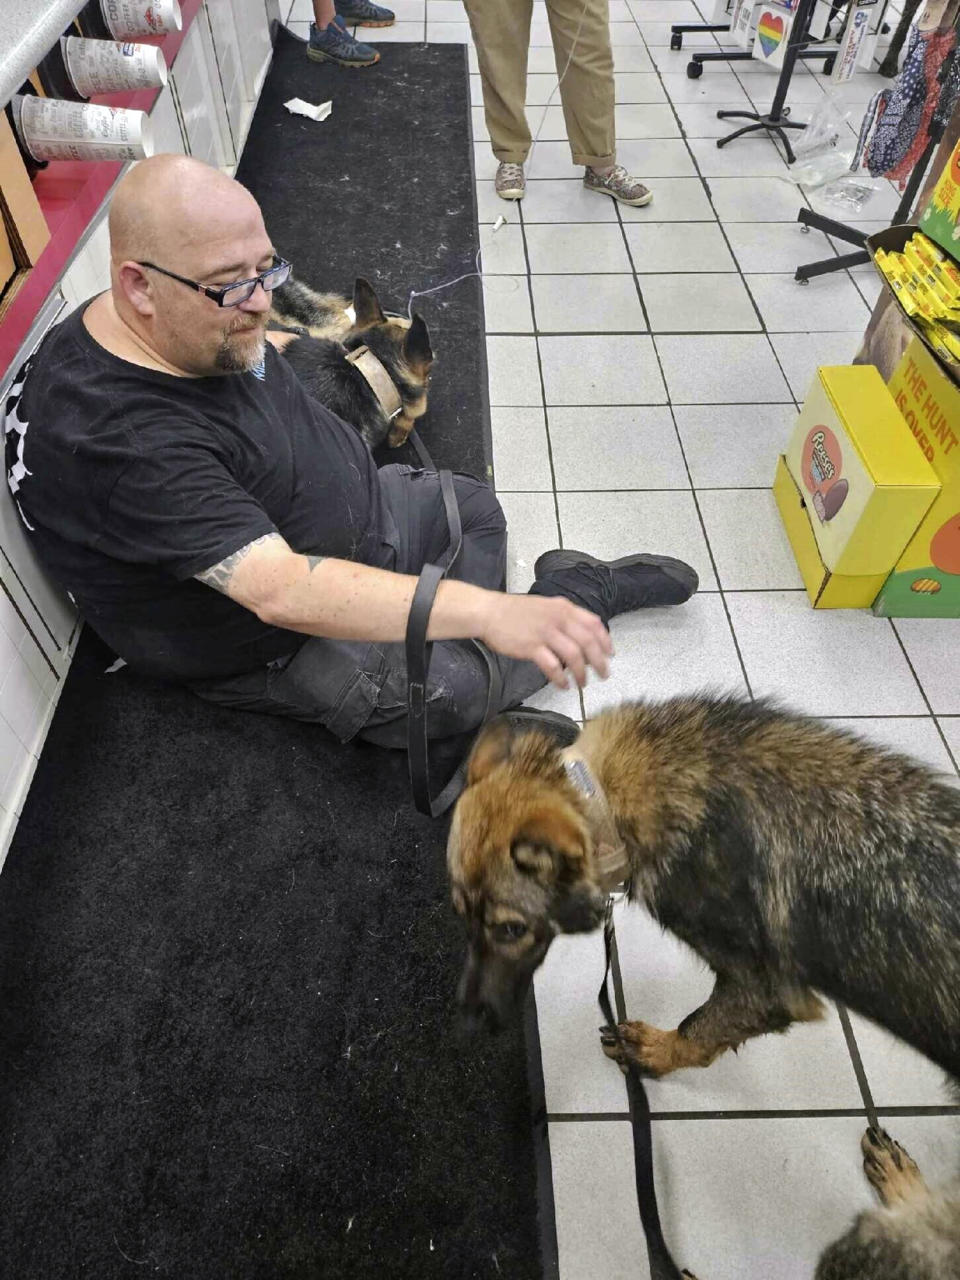 In this photo provided by the Humane Society of Hobart, Ind., a dog suffering from heat-related injury is aided by a man inside the Road Ranger convenience store, in Lake Station, Ind., July 27, 2023. (Jennifer Webber/Humane Society of Hobart, Ind. via AP)